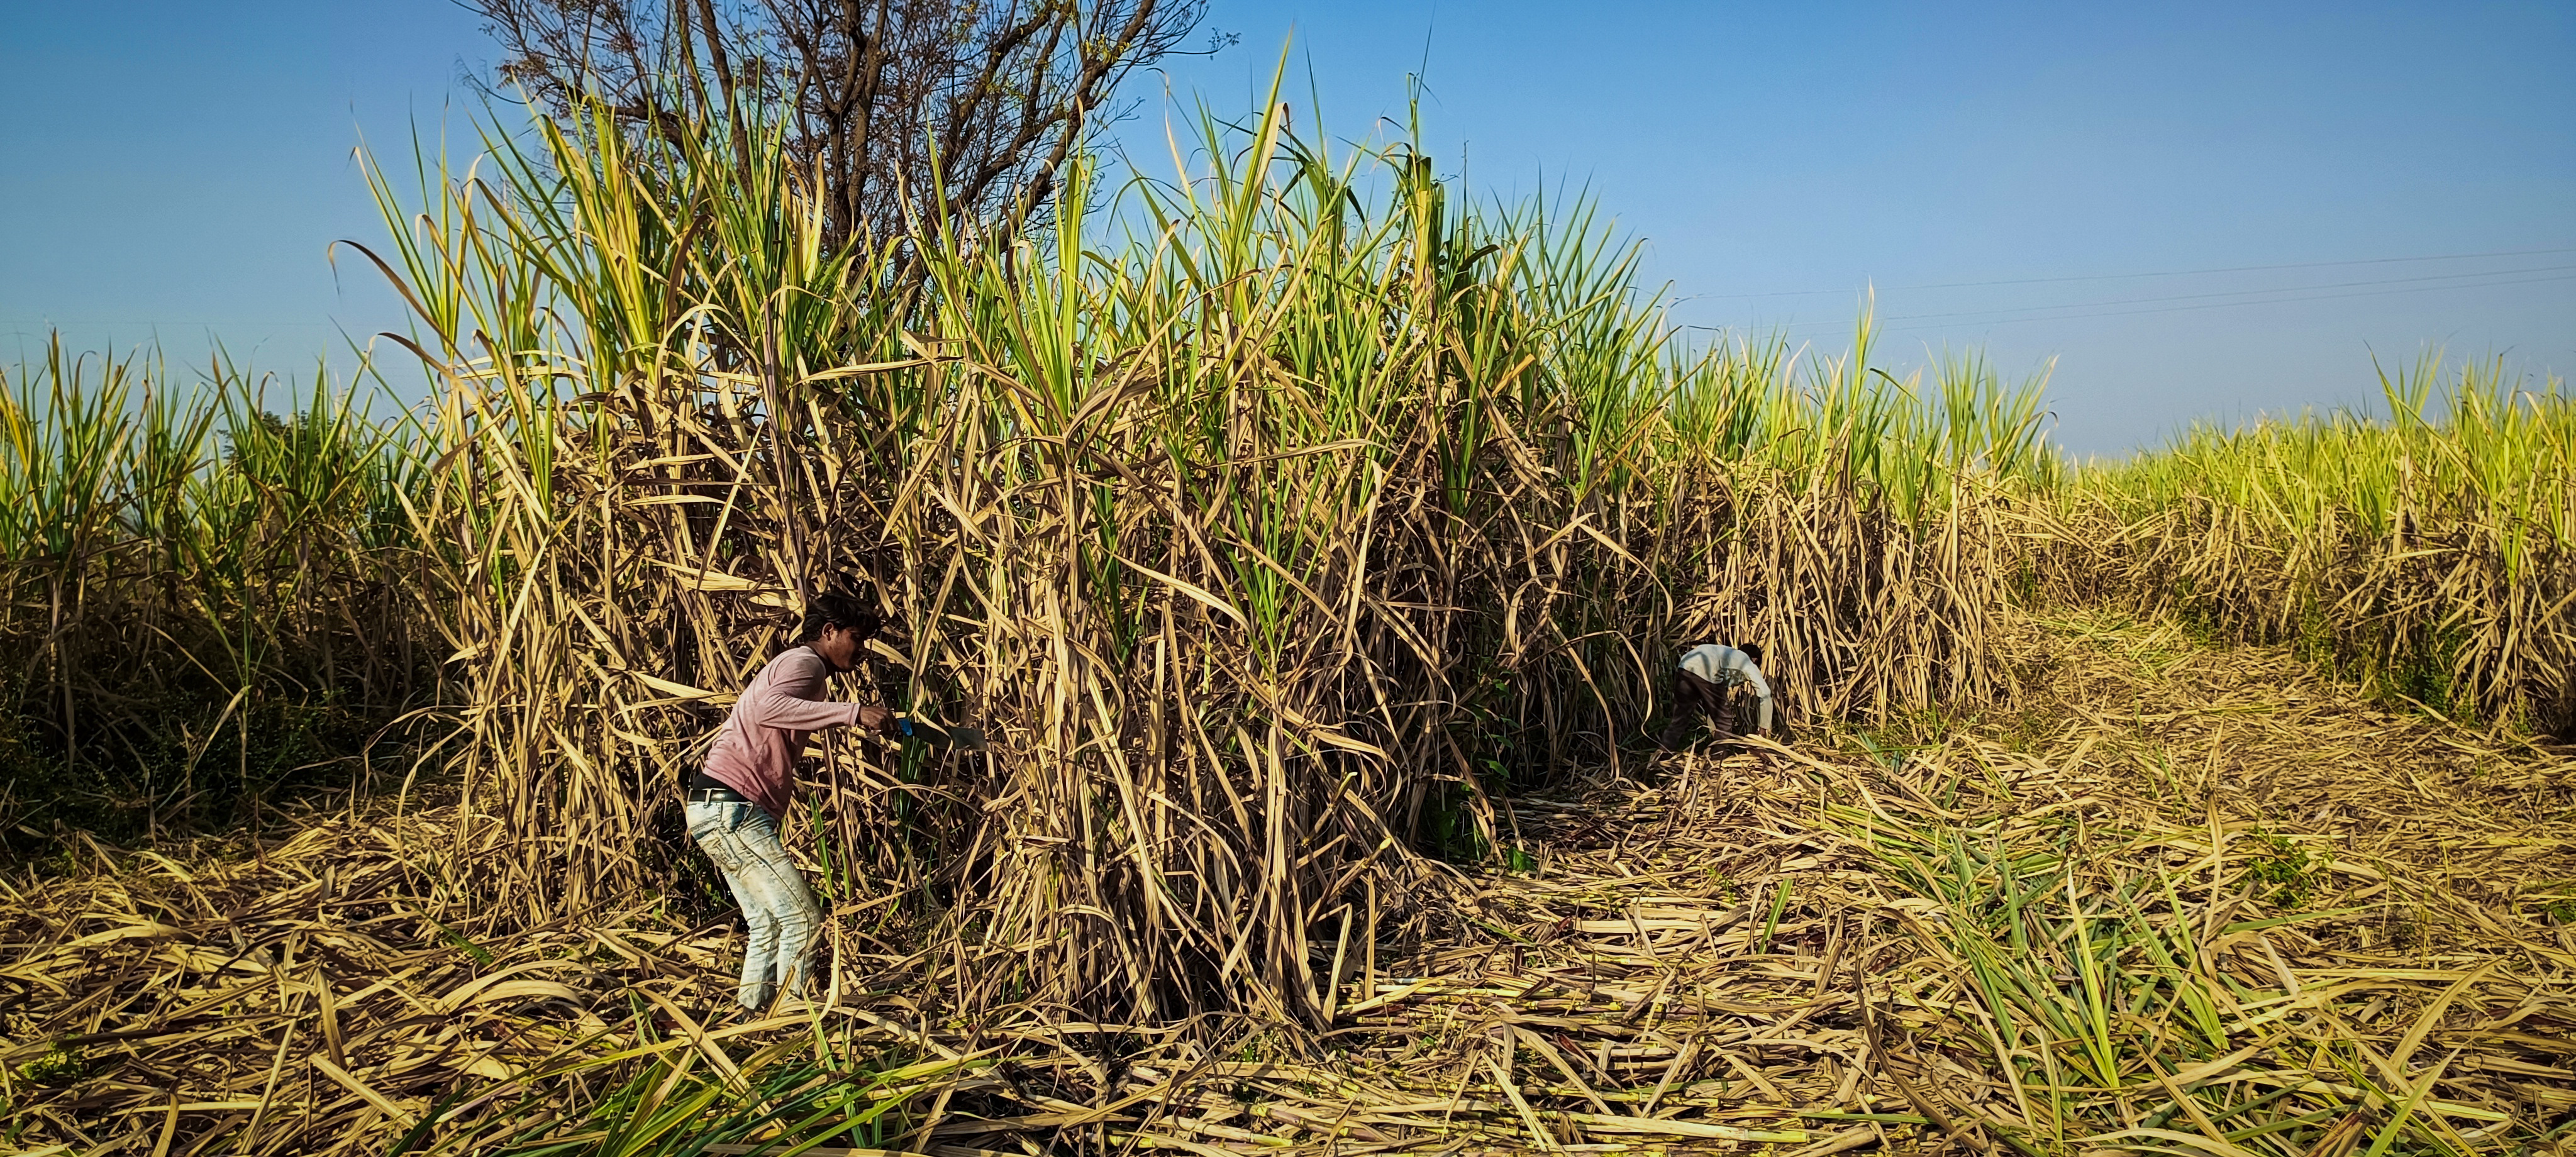 child workers, sugar industry, India